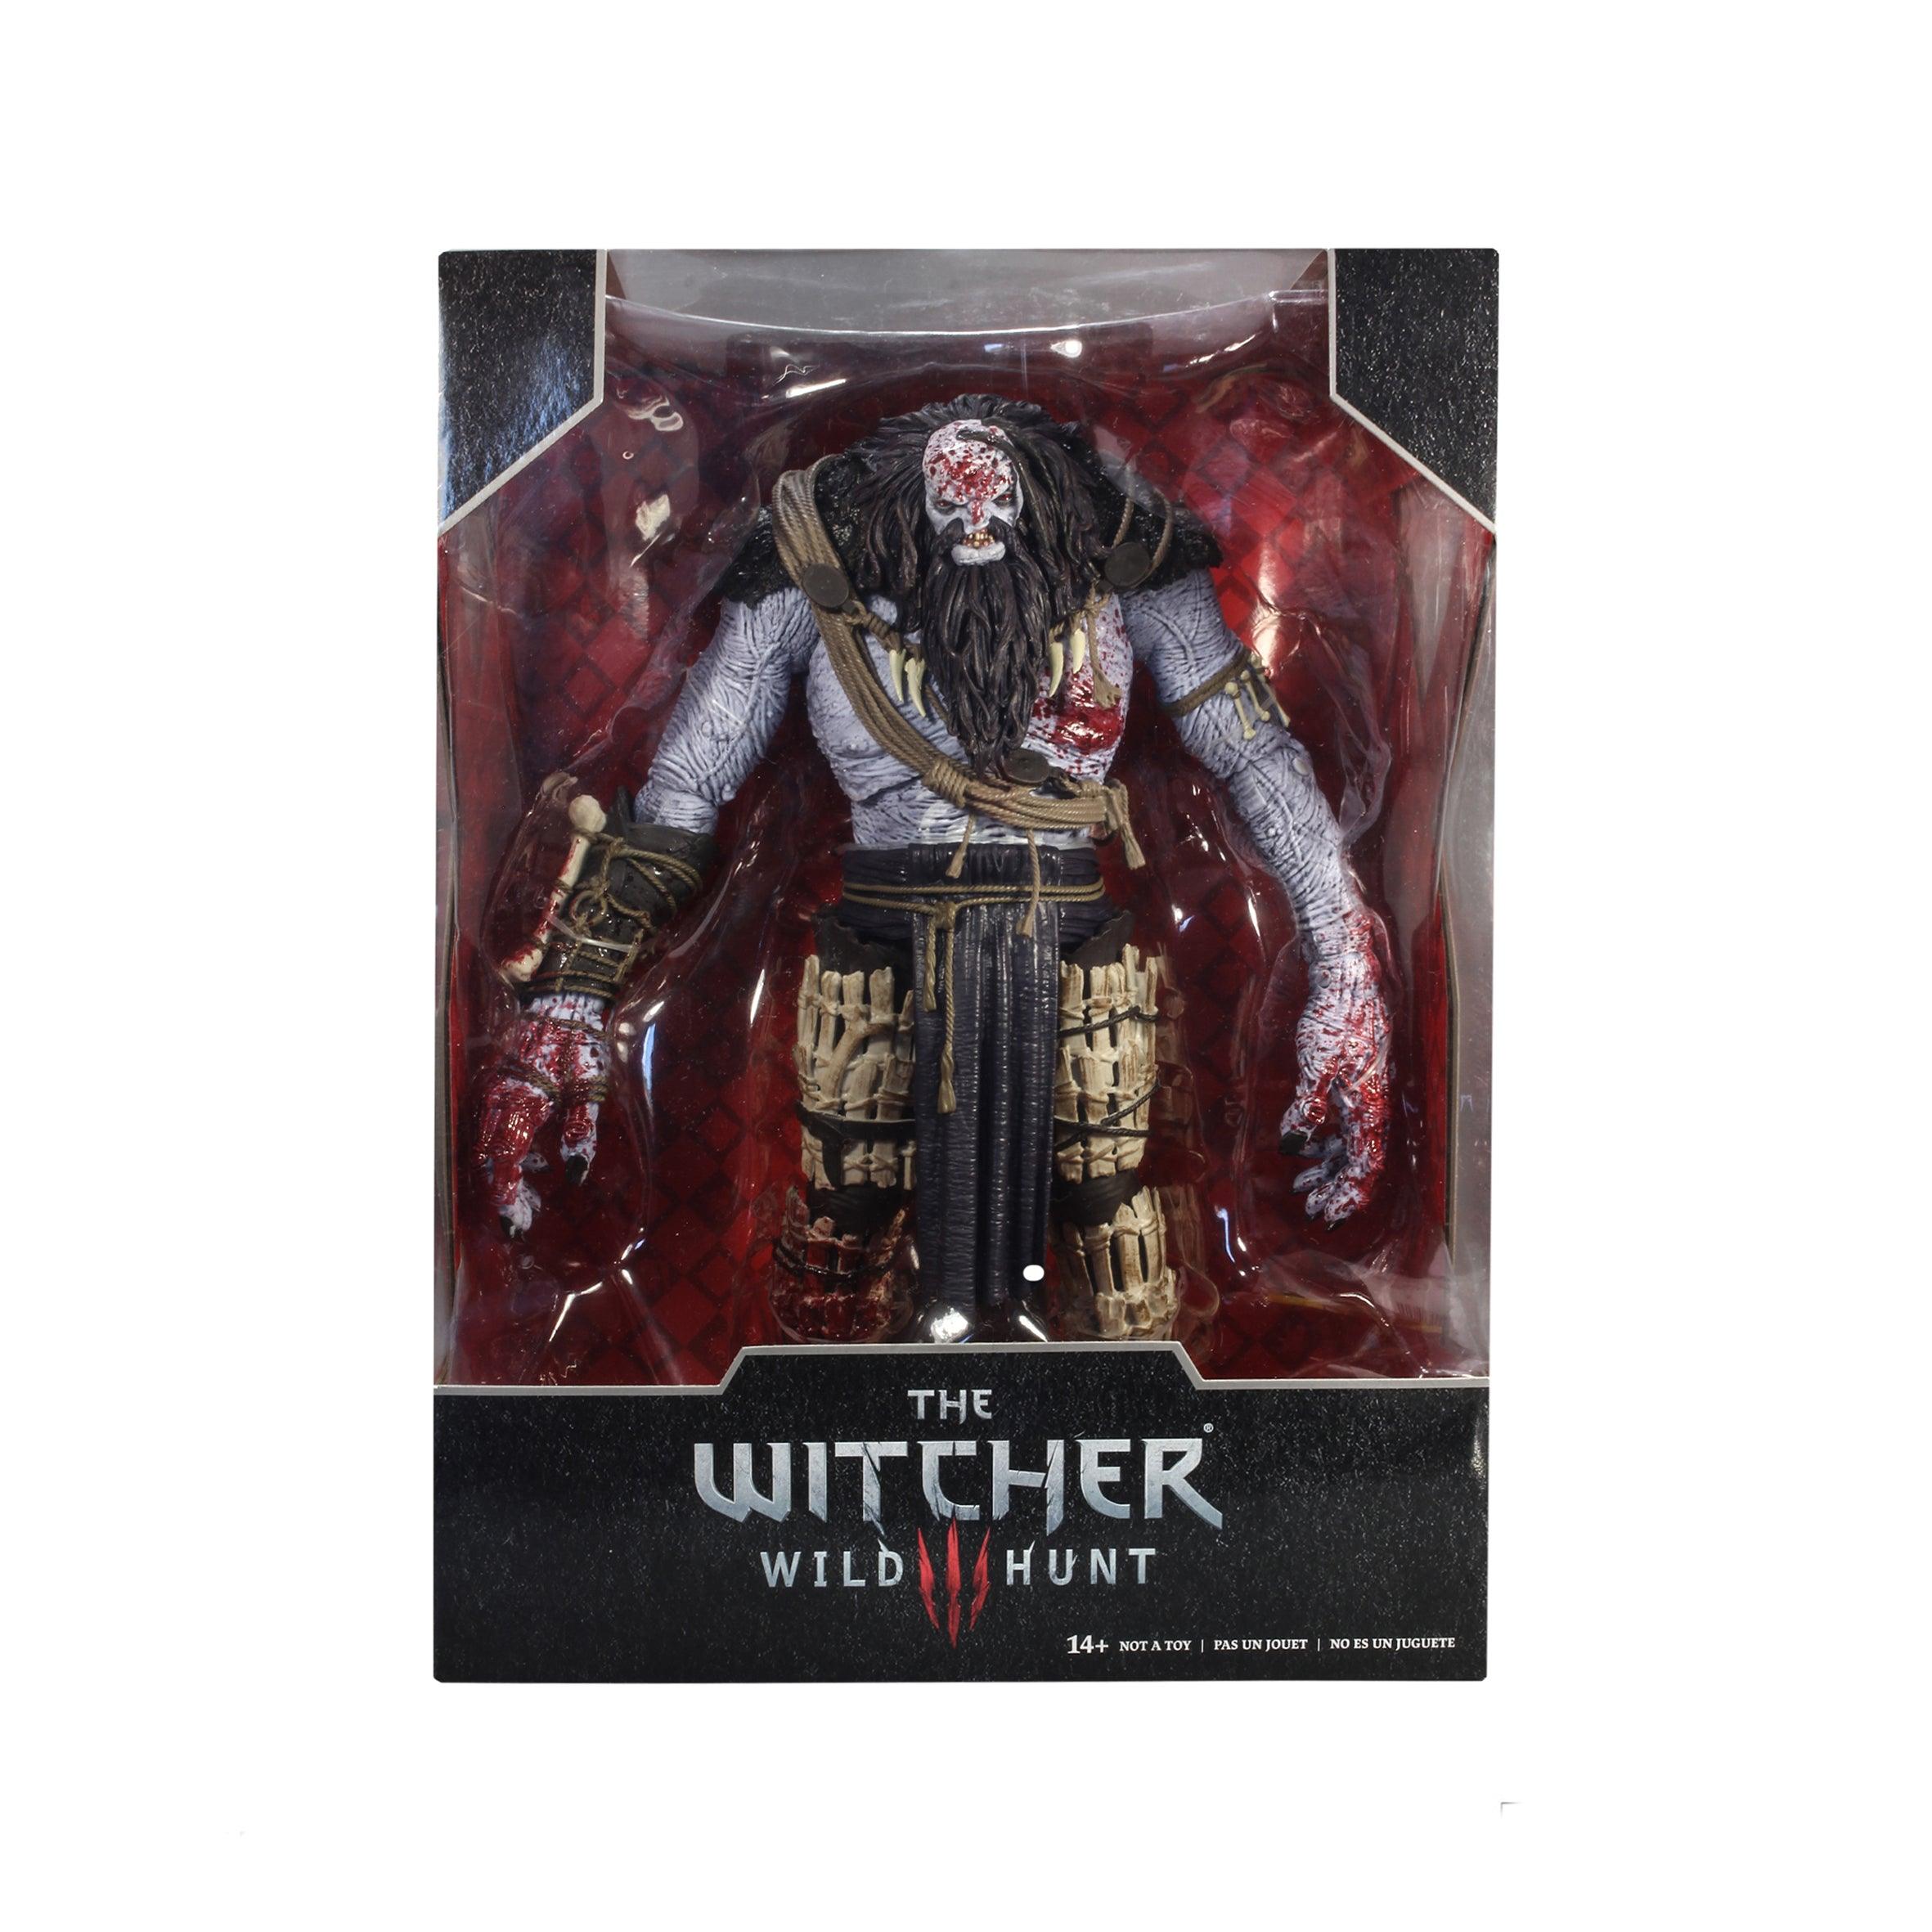 Mft Mg Witcher Ice Giant Blood - Want a New Gadget